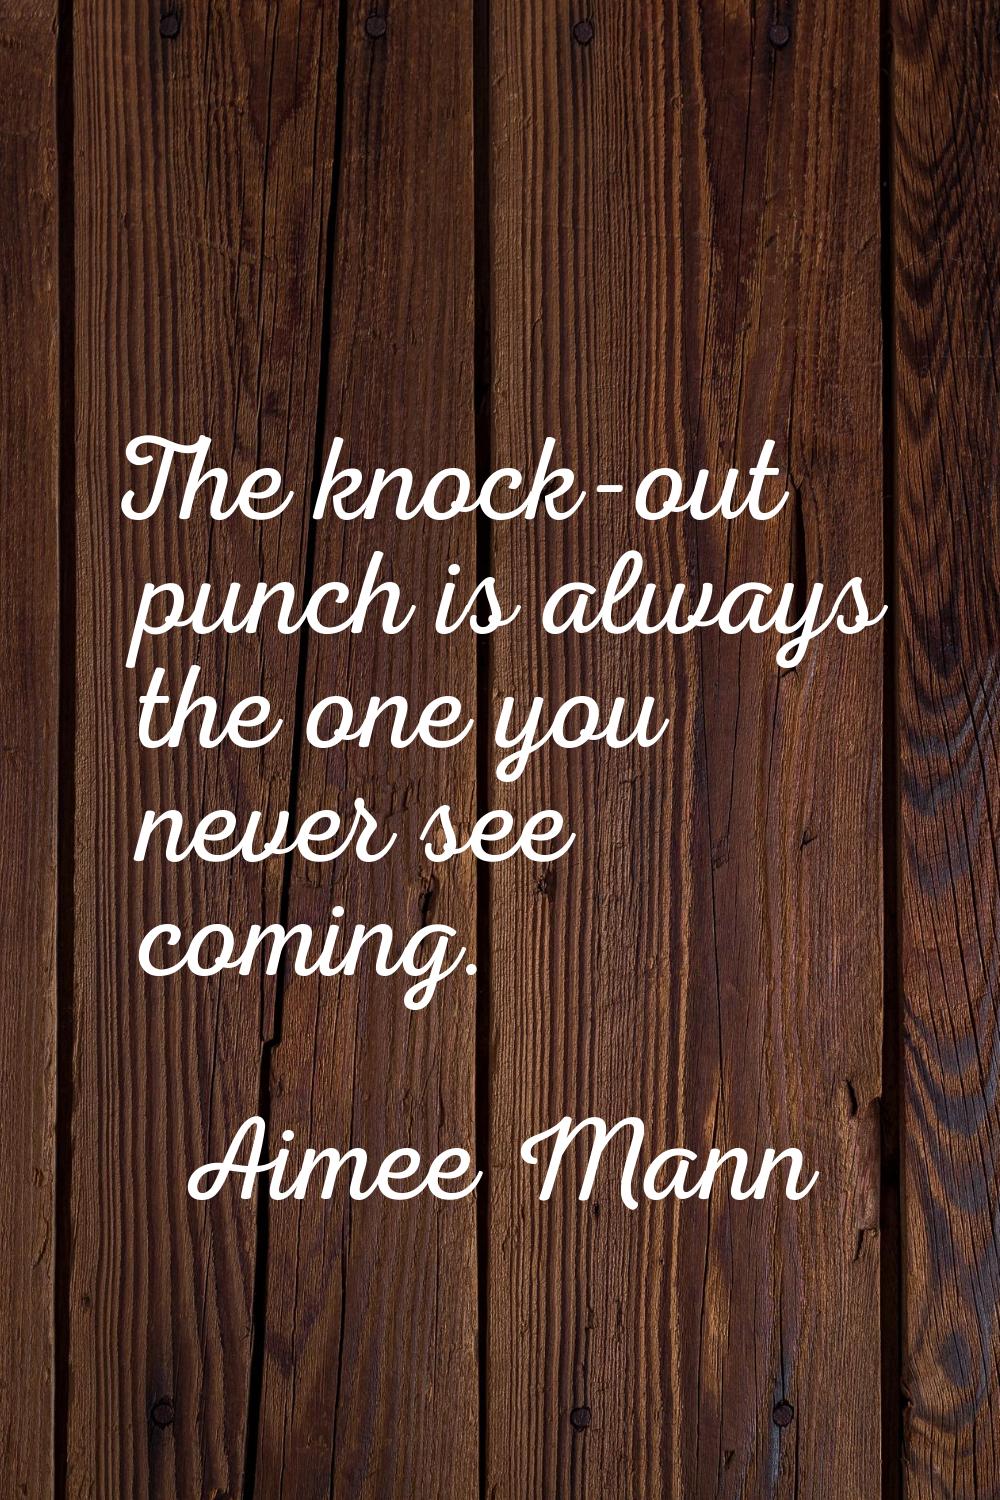 The knock-out punch is always the one you never see coming.